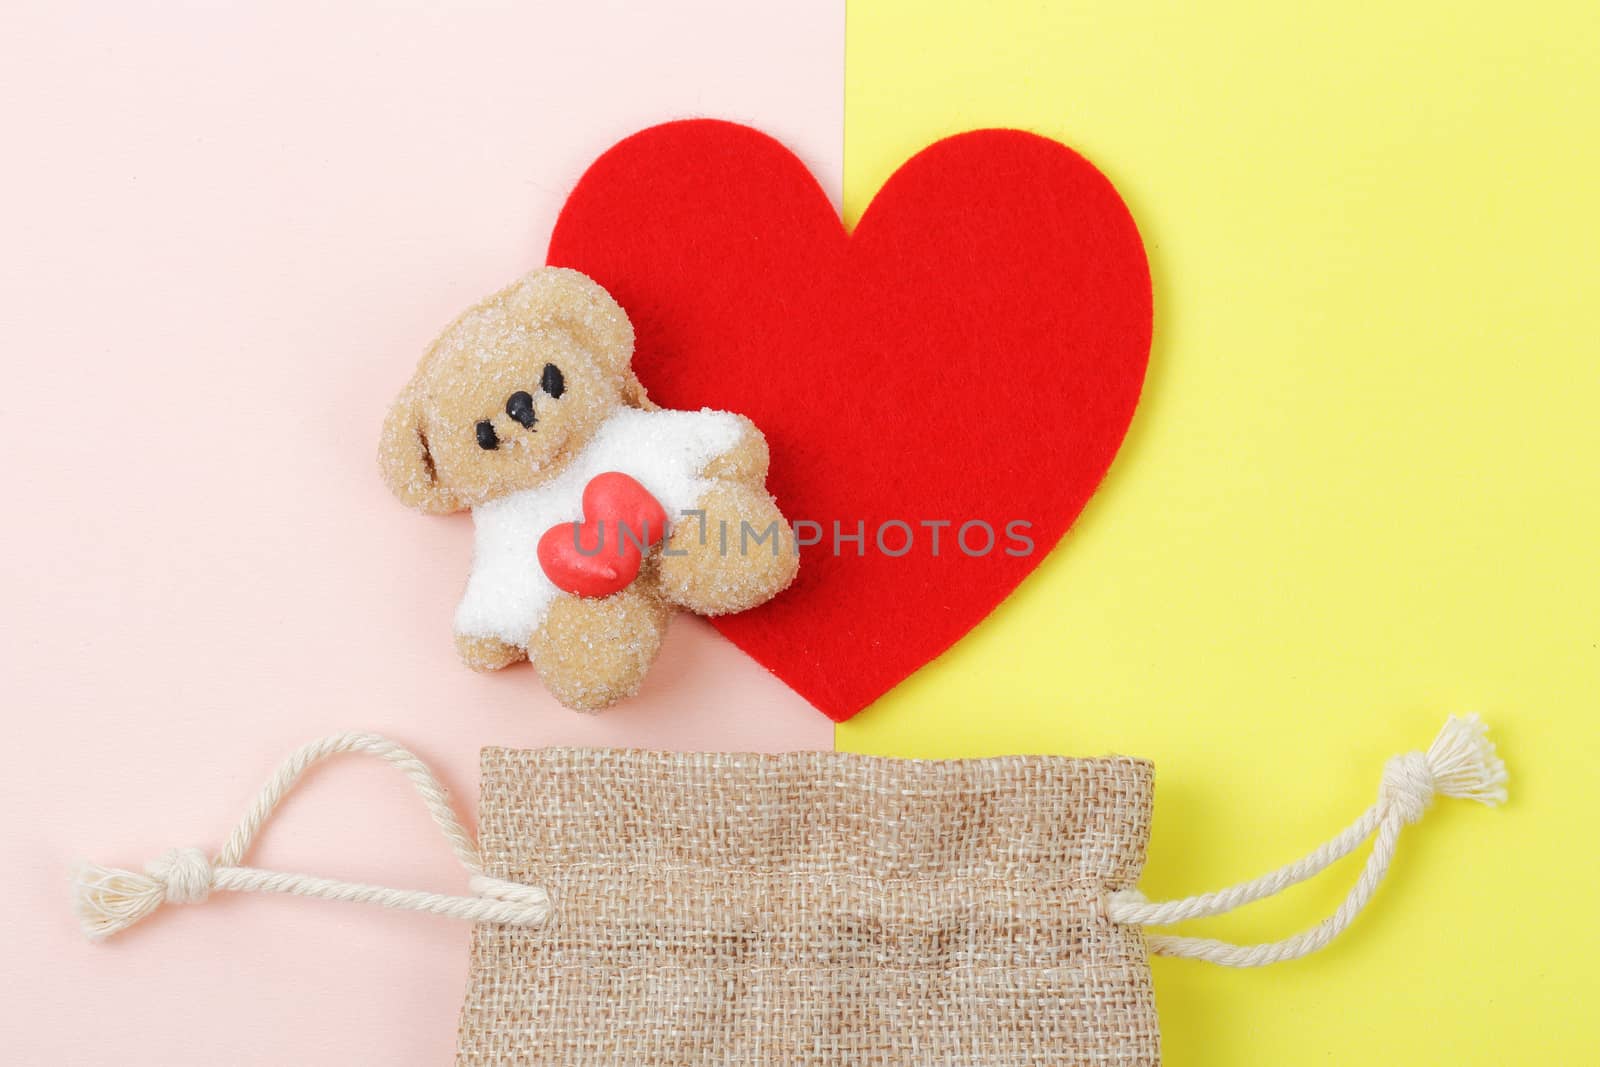 Sweet of marshmallow bear with red heart over colorful paper background, Valentine's day concept.